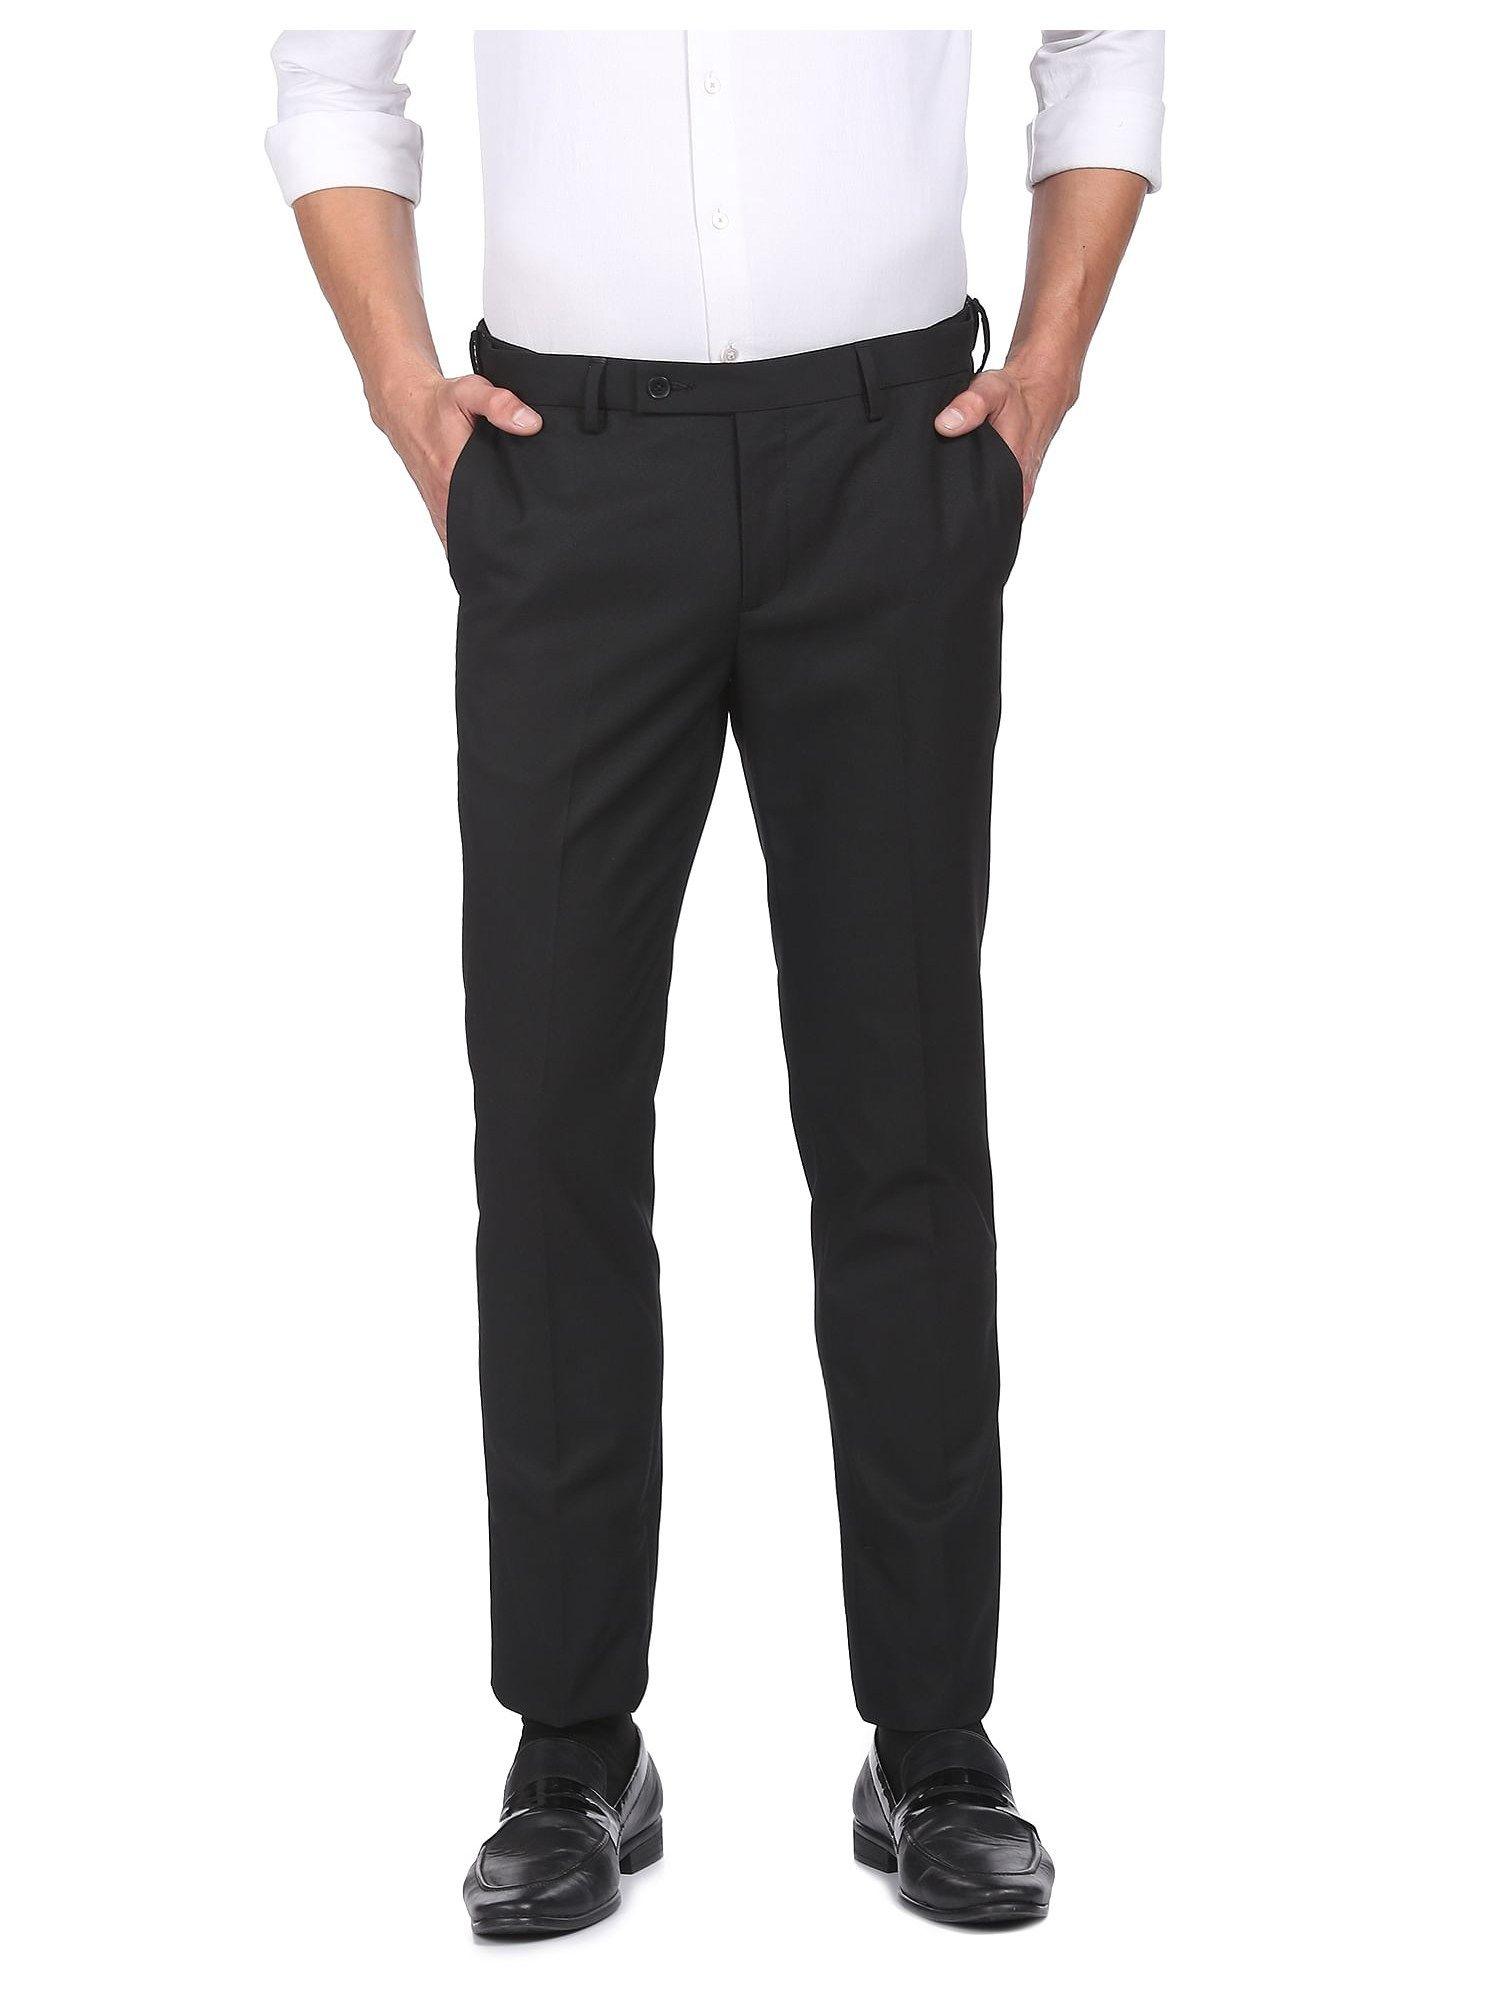 men-black-mid-rise-solid-formal-trousers